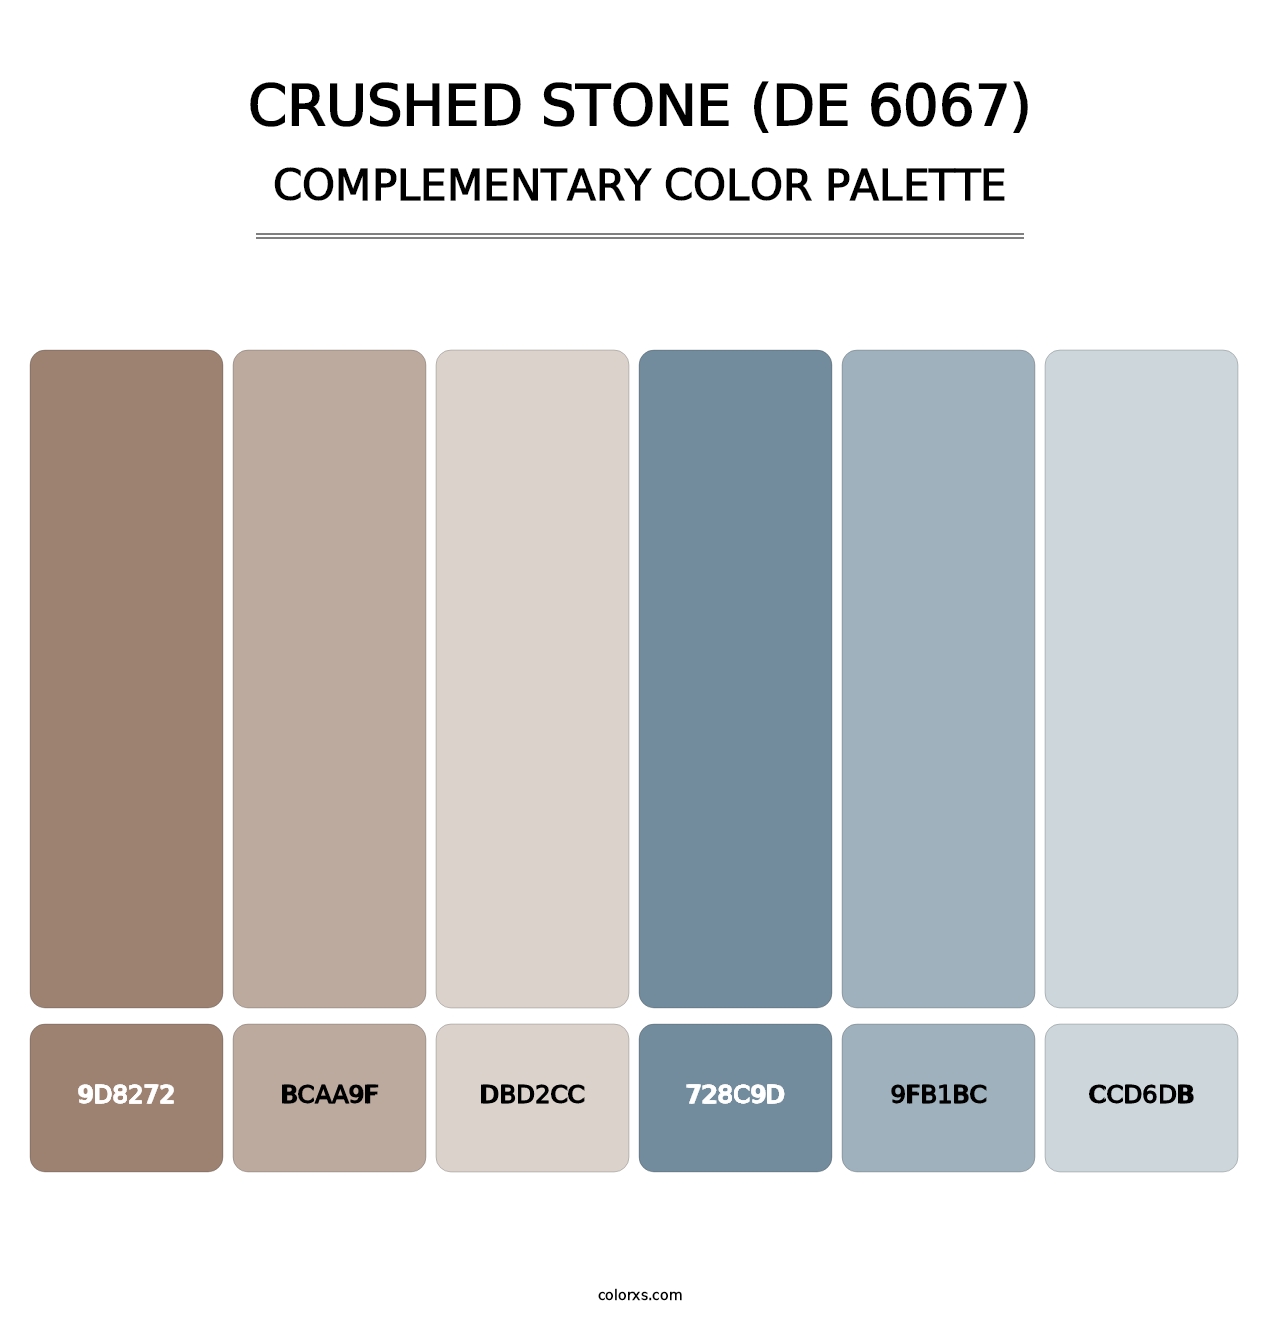 Crushed Stone (DE 6067) - Complementary Color Palette